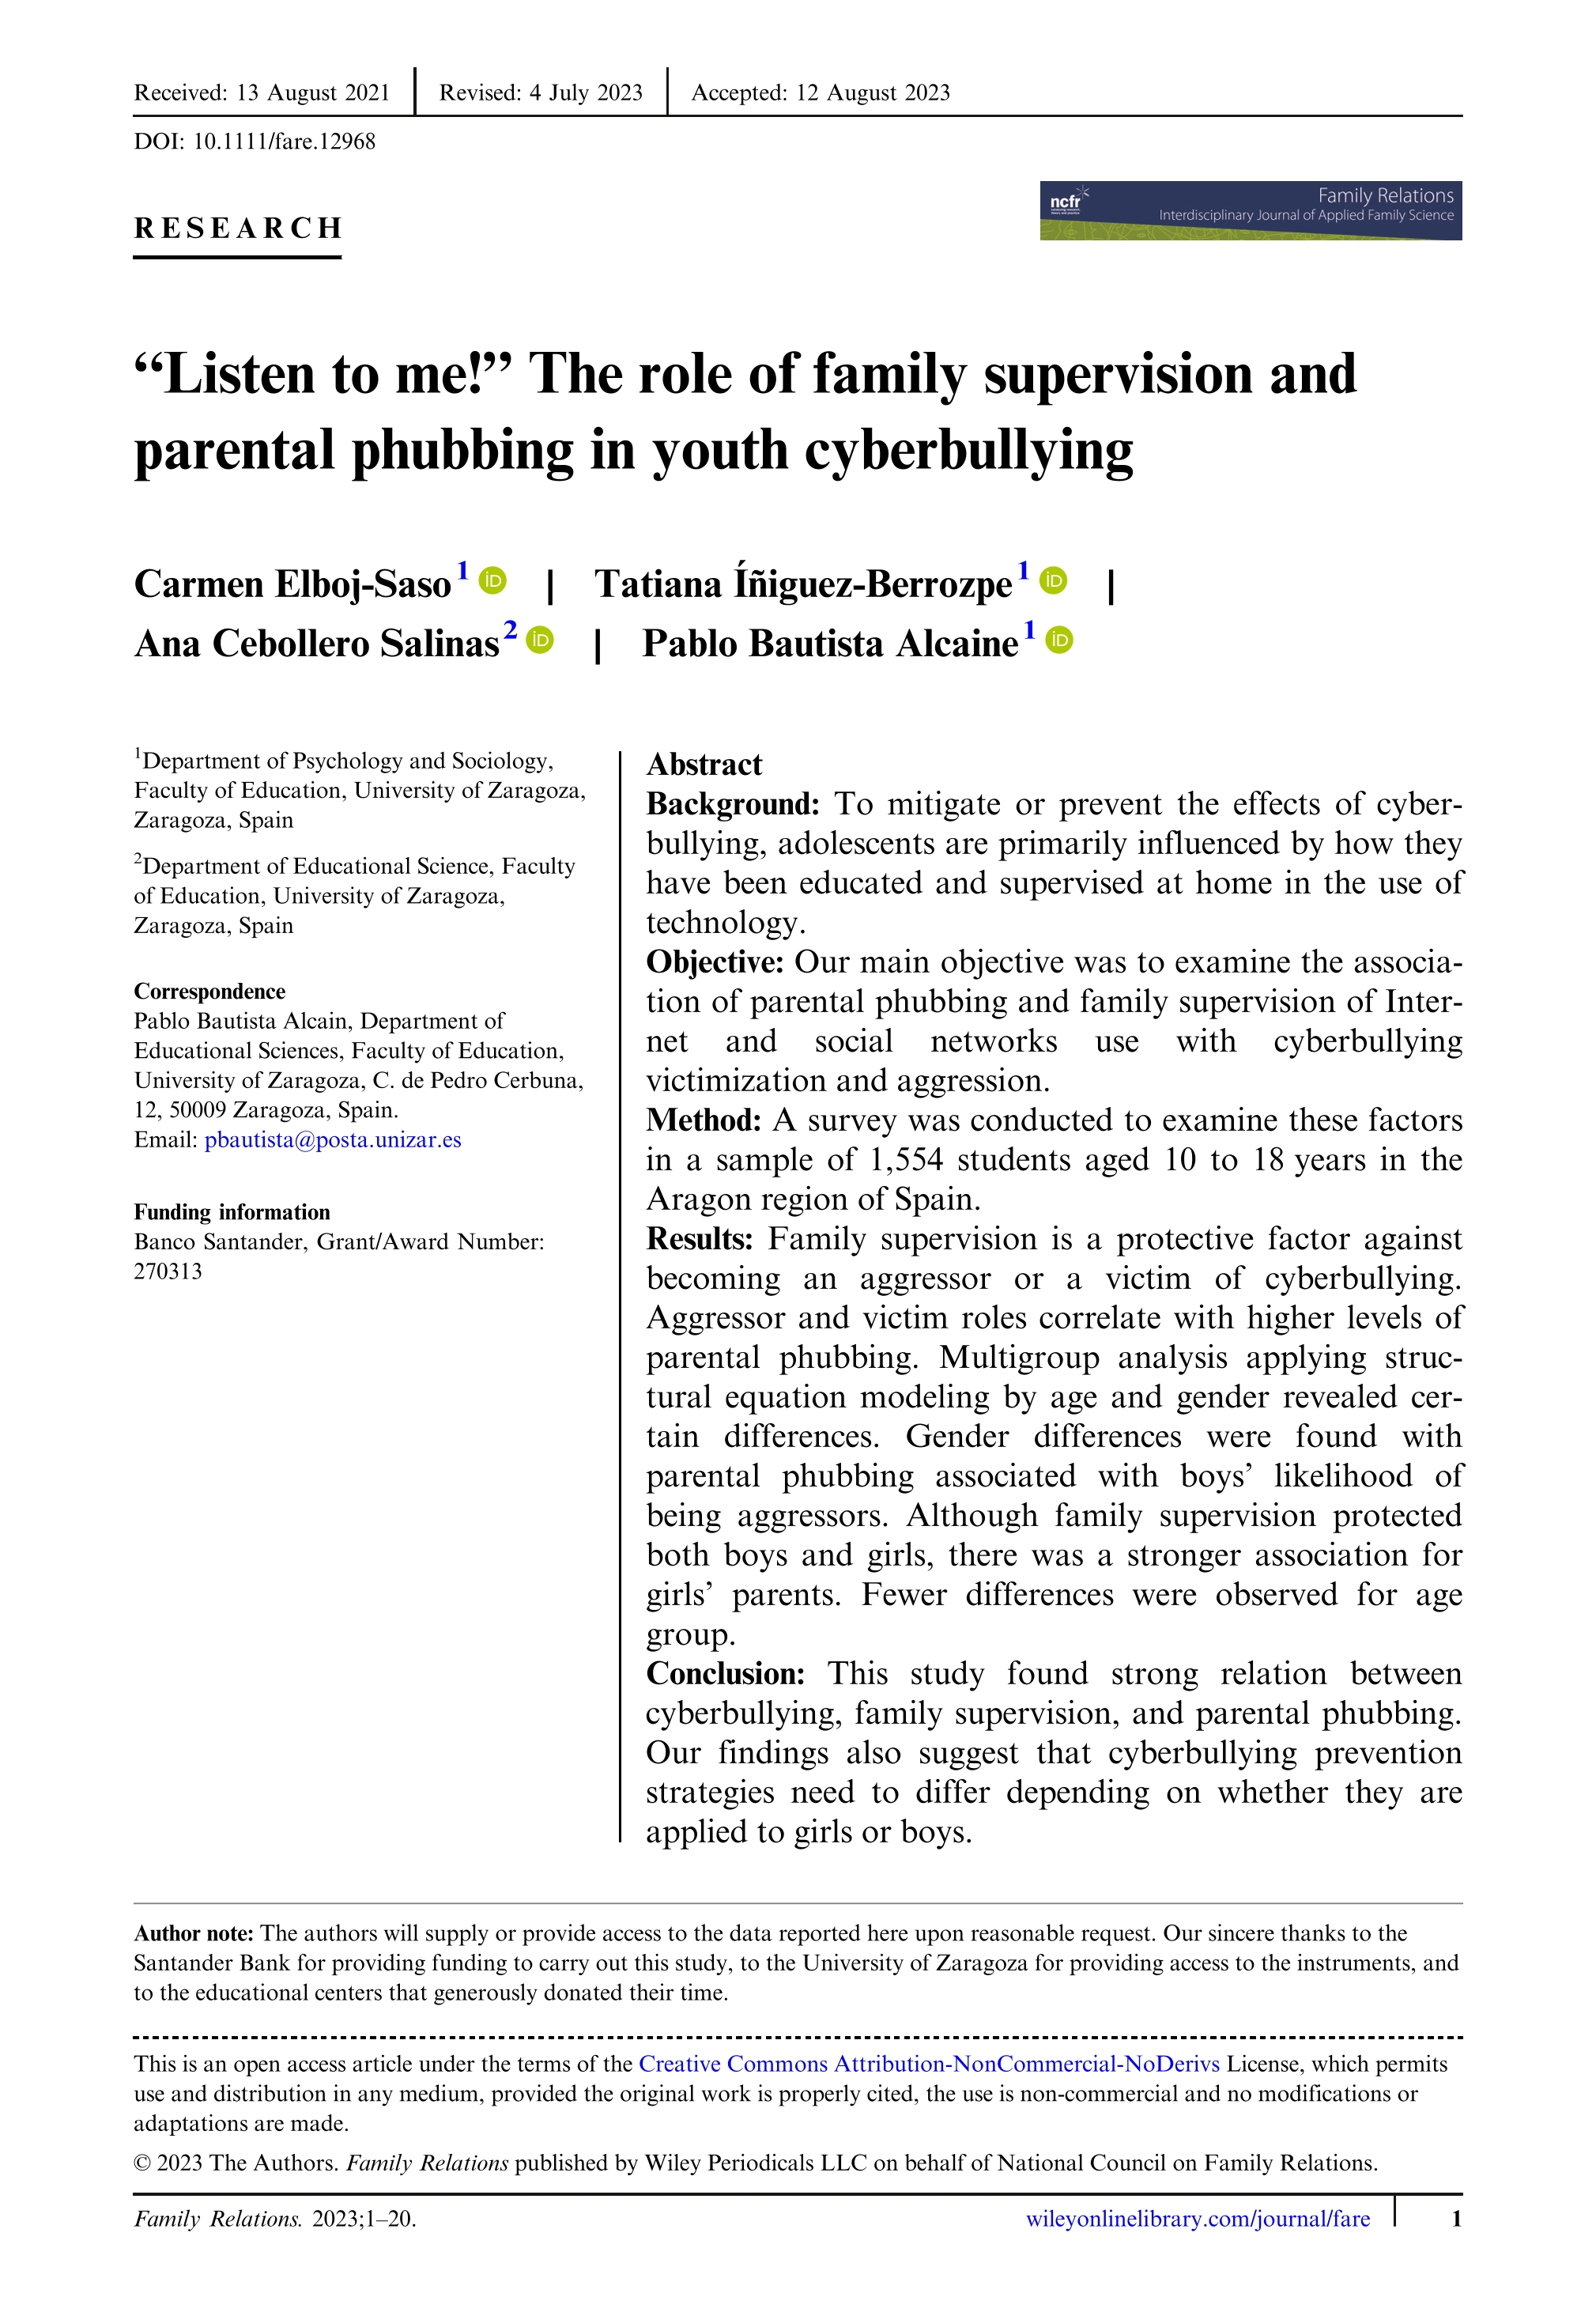 “Listen to me!” The role of family supervision and parental phubbing in youth cyberbullying